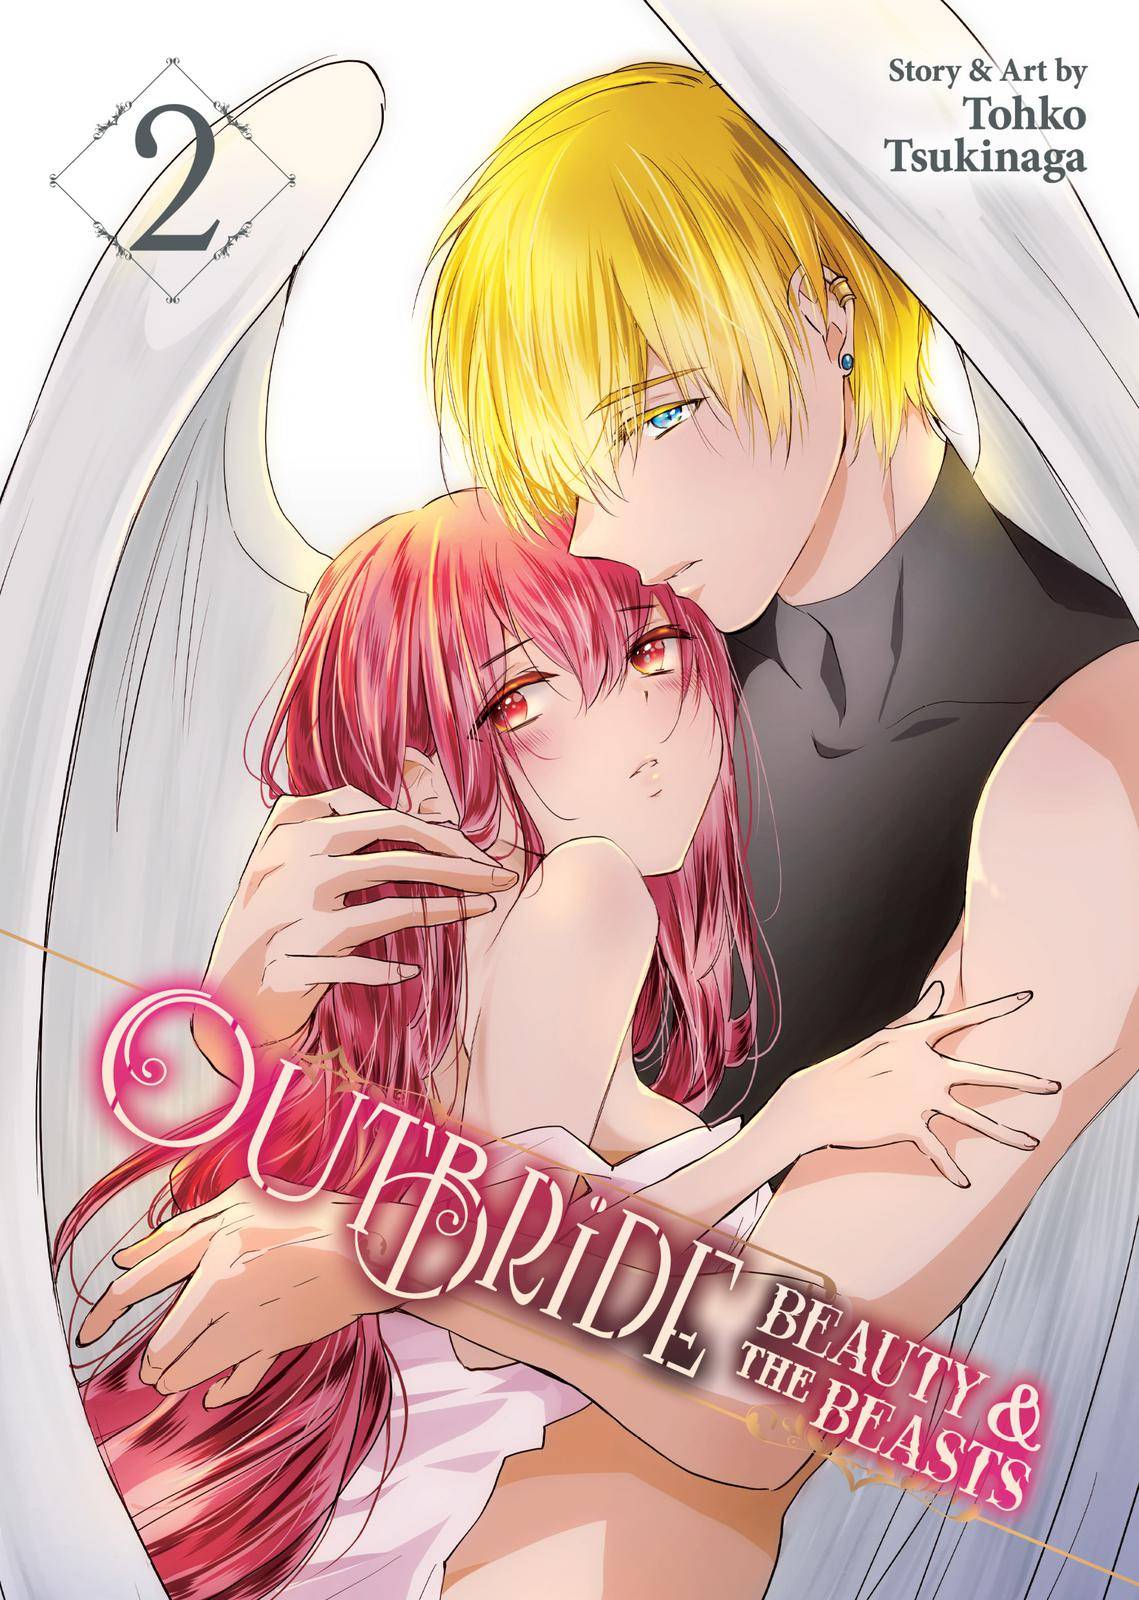 Outbride - Beauty and the Beasts - chapter 7 - #1